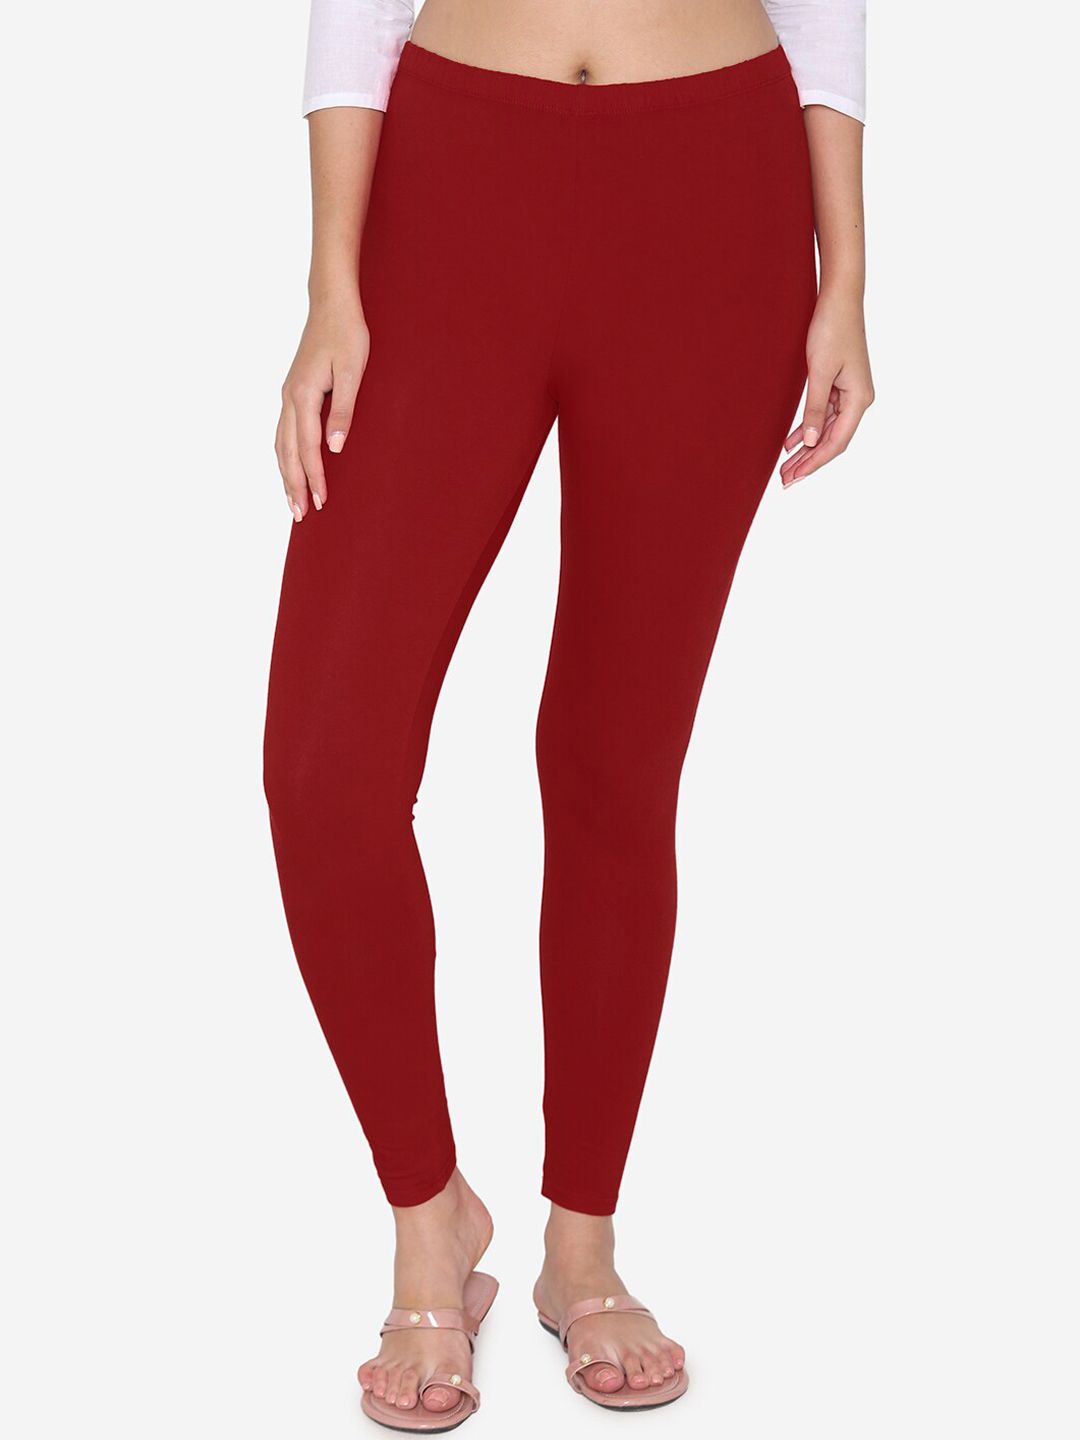 Vami Women Maroon Solid Ankle-Length Stretchable Leggings Price in India